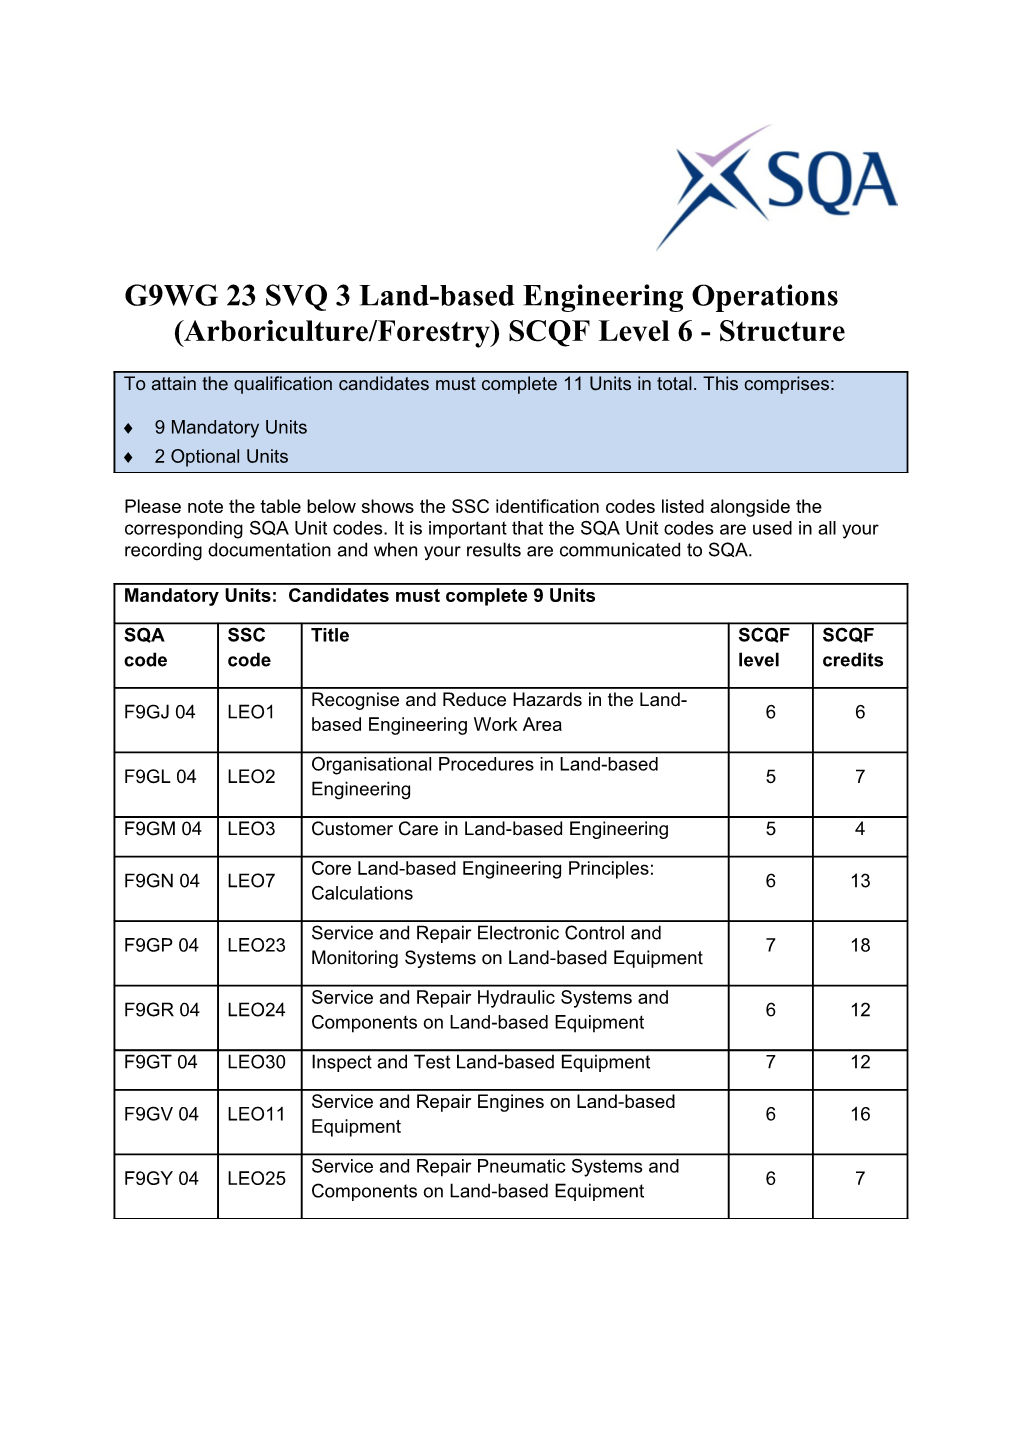 G9WG 23 SVQ 3 Land-Based Engineering Operations (Arboriculture/Forestry) SCQF Level 6